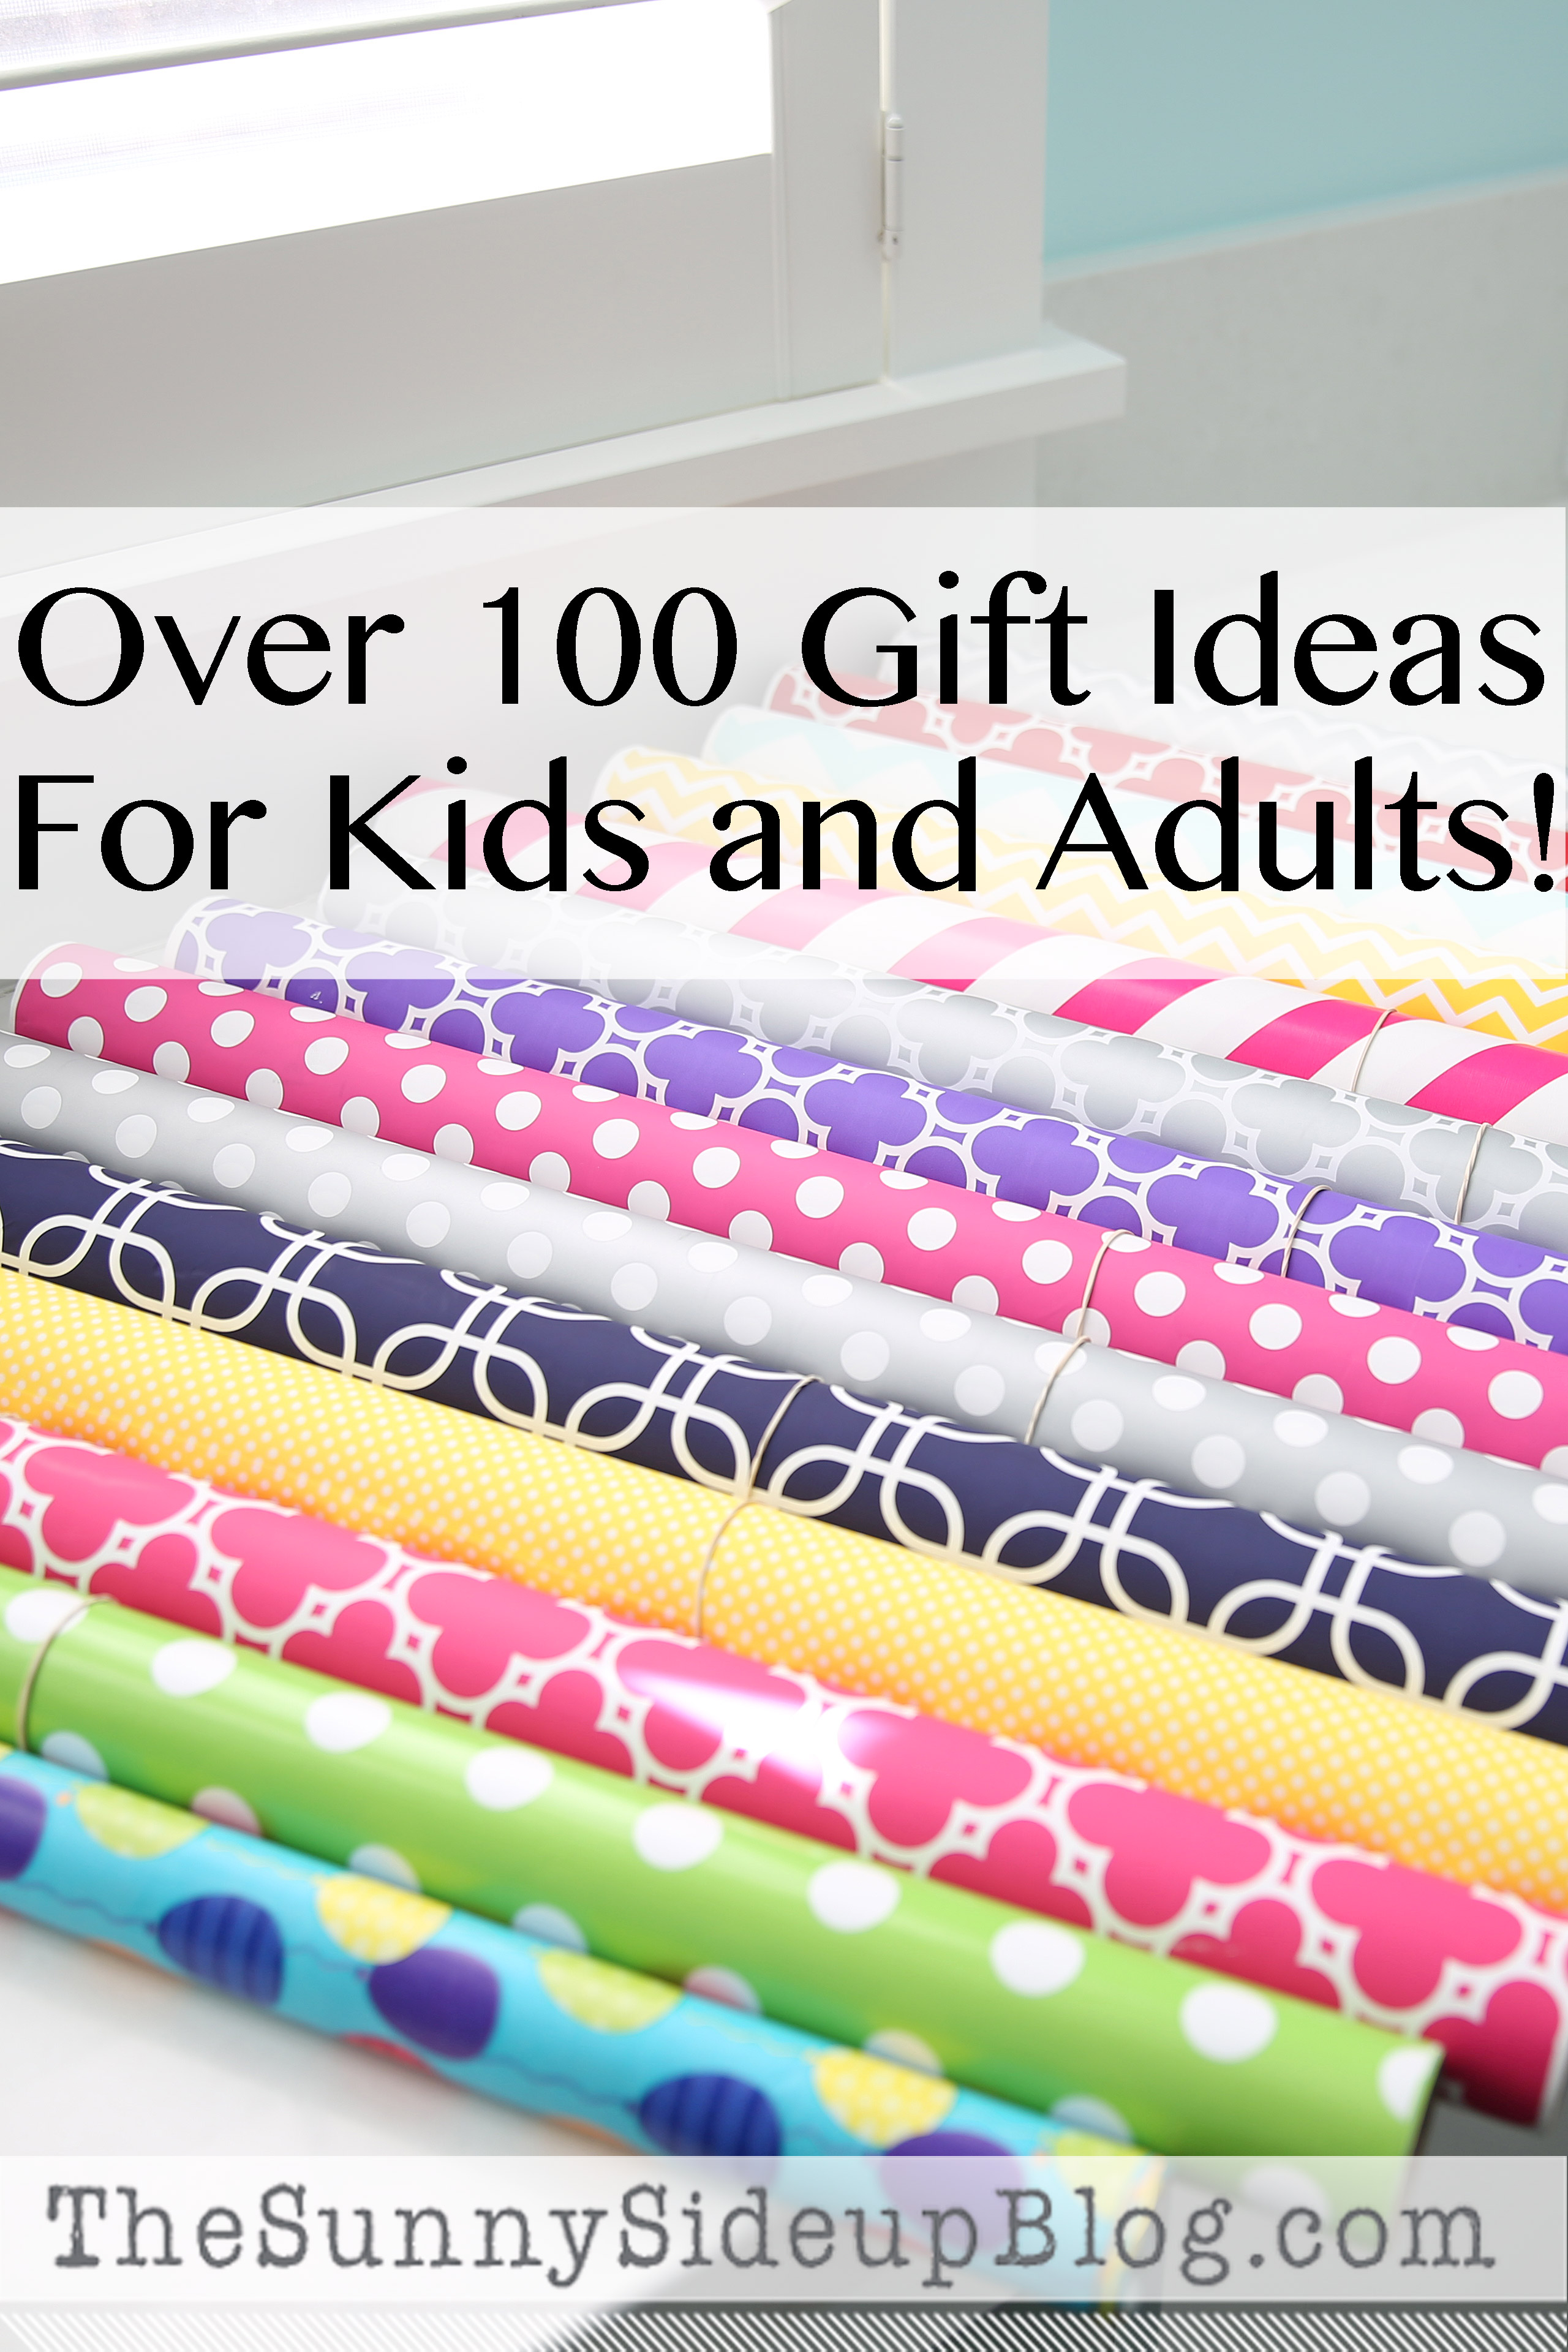 Over 100 gift ideas for kids and adults!